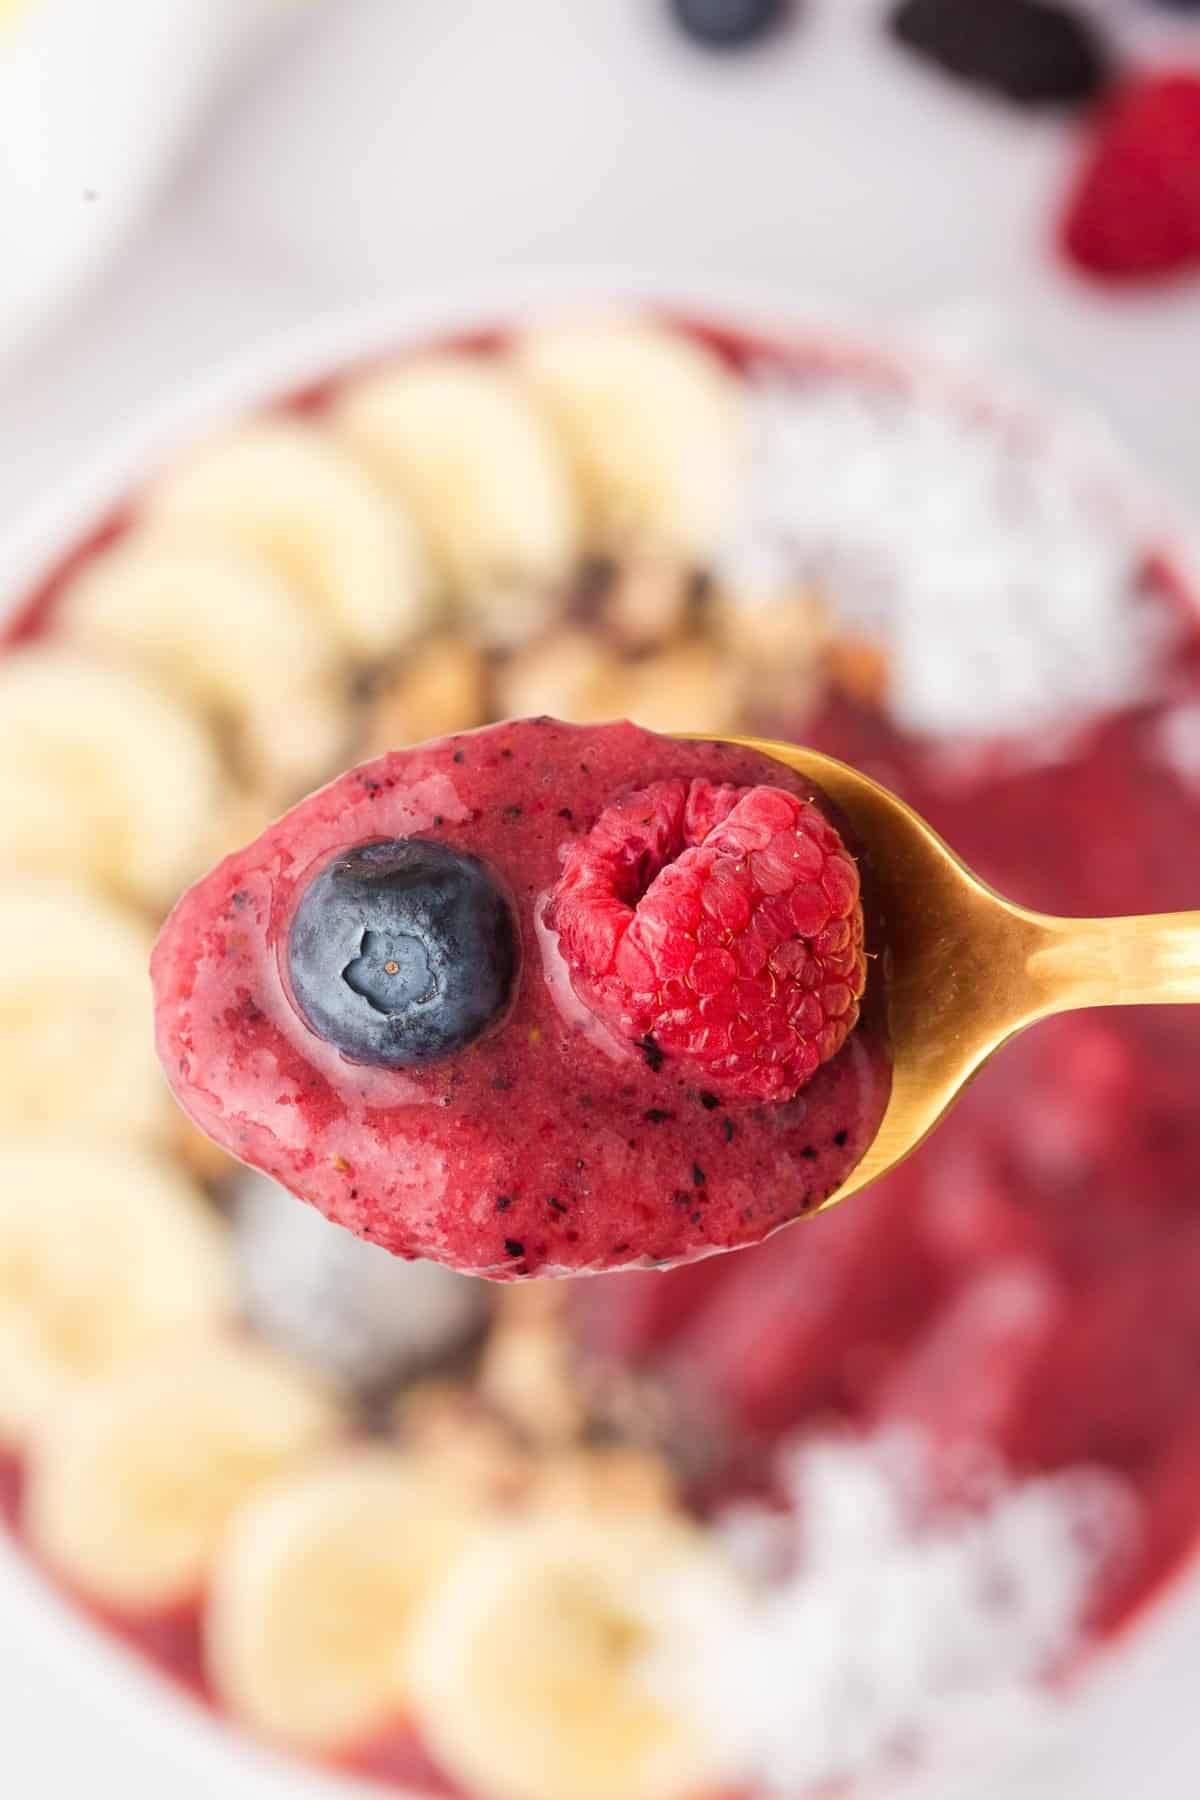 Smoothie and fresh berries on a spoon.